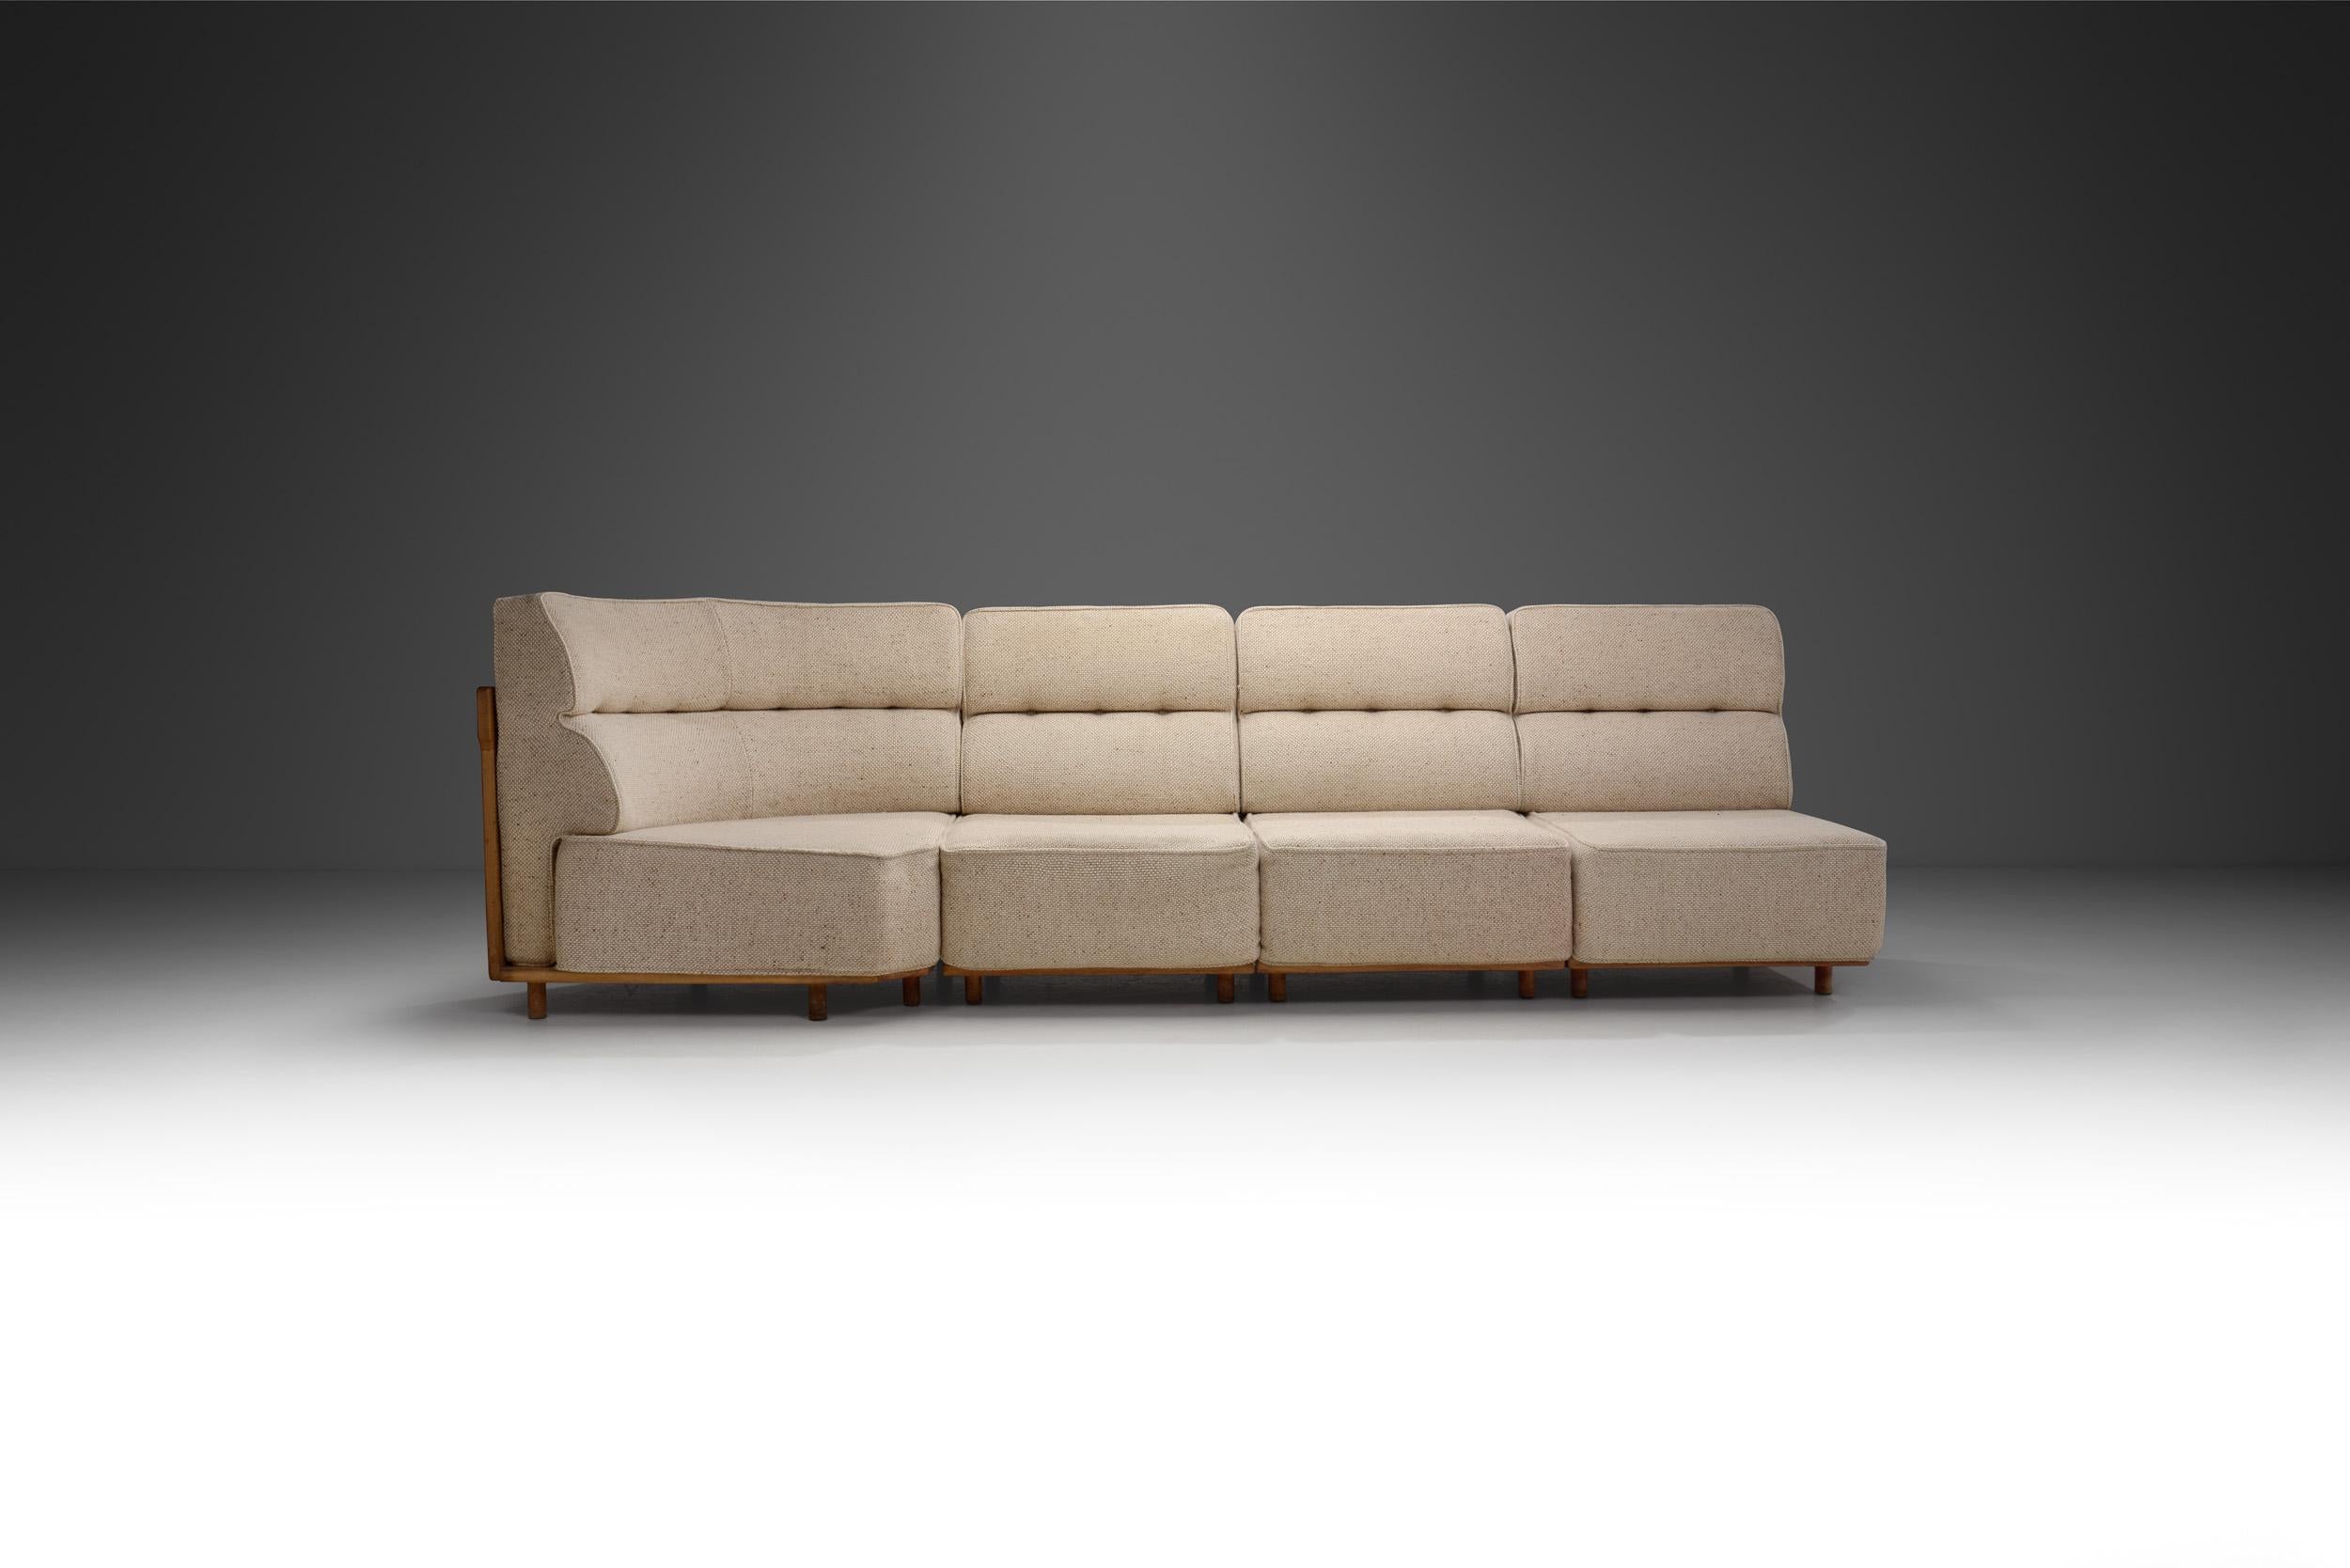 French design duo, Robert Guillerme and Jacques Chambron, are known for their high-quality, solid oak furniture created for their own company, Votre Maison. Like most of their designs, this sofa model displays a beautiful contrast between the oak